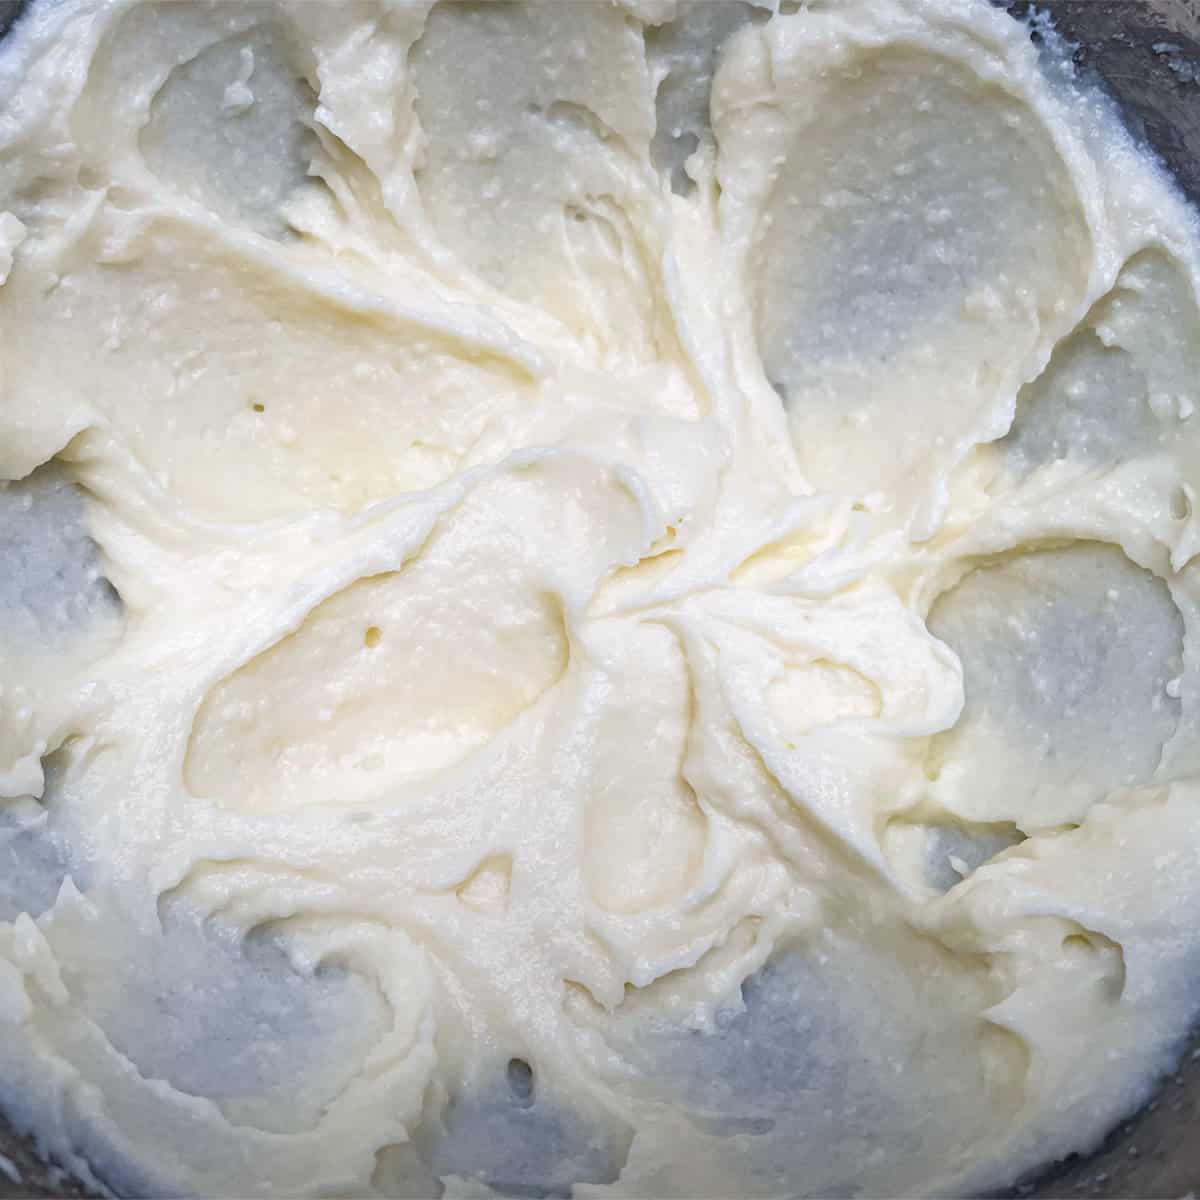 The creamy looking mixture of butter, sugar, and ricotta together in a mixer bowl.